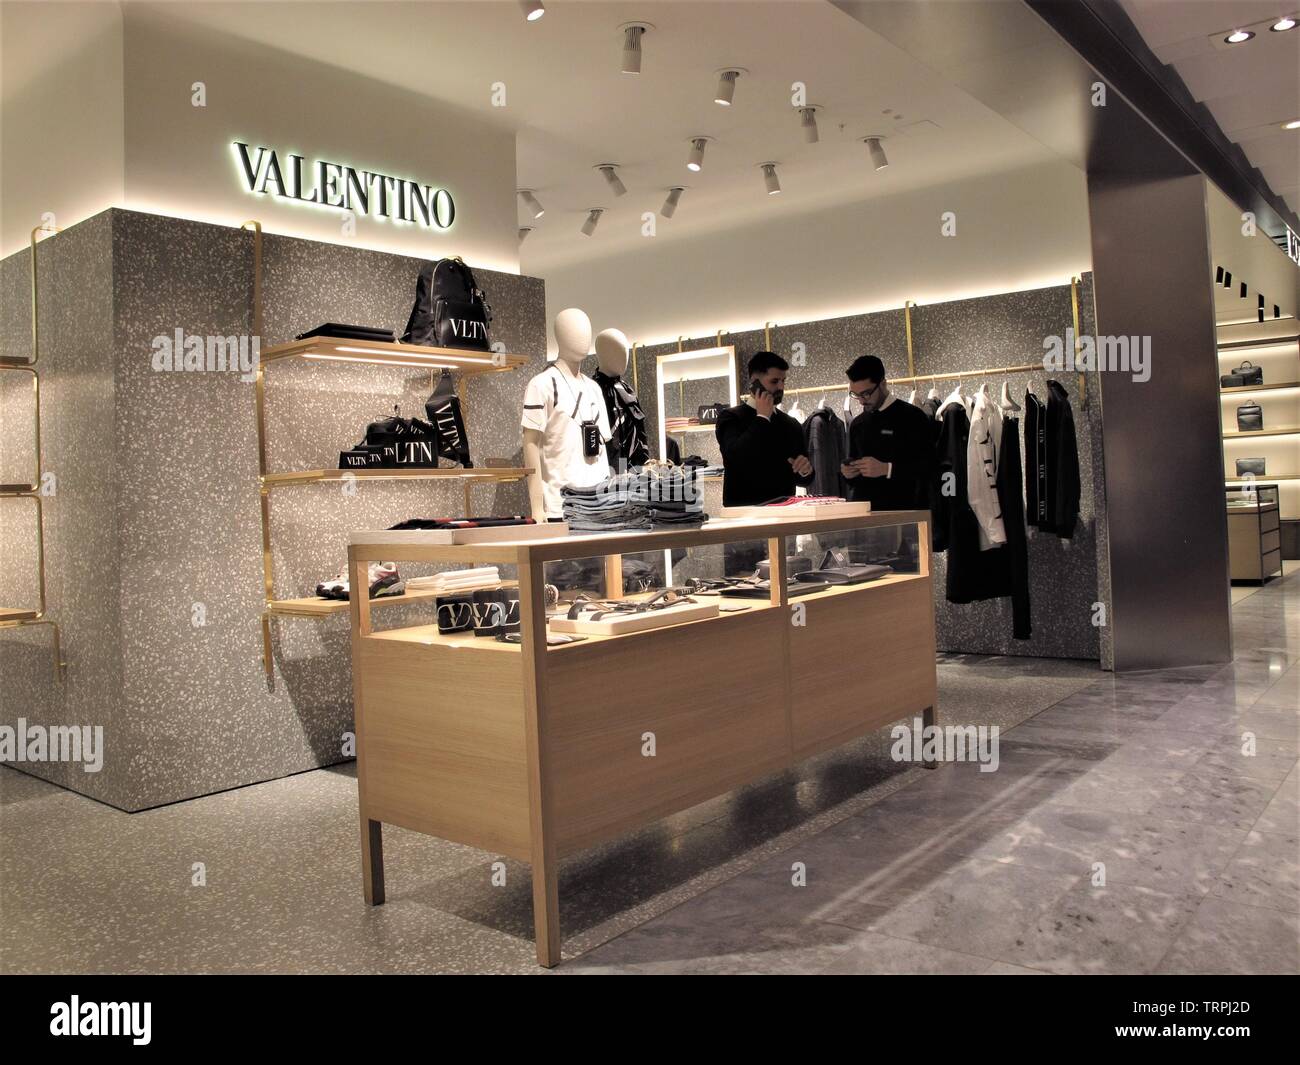 Valentino clothing at the Rinascente fashion store in Rome Stock Photo -  Alamy